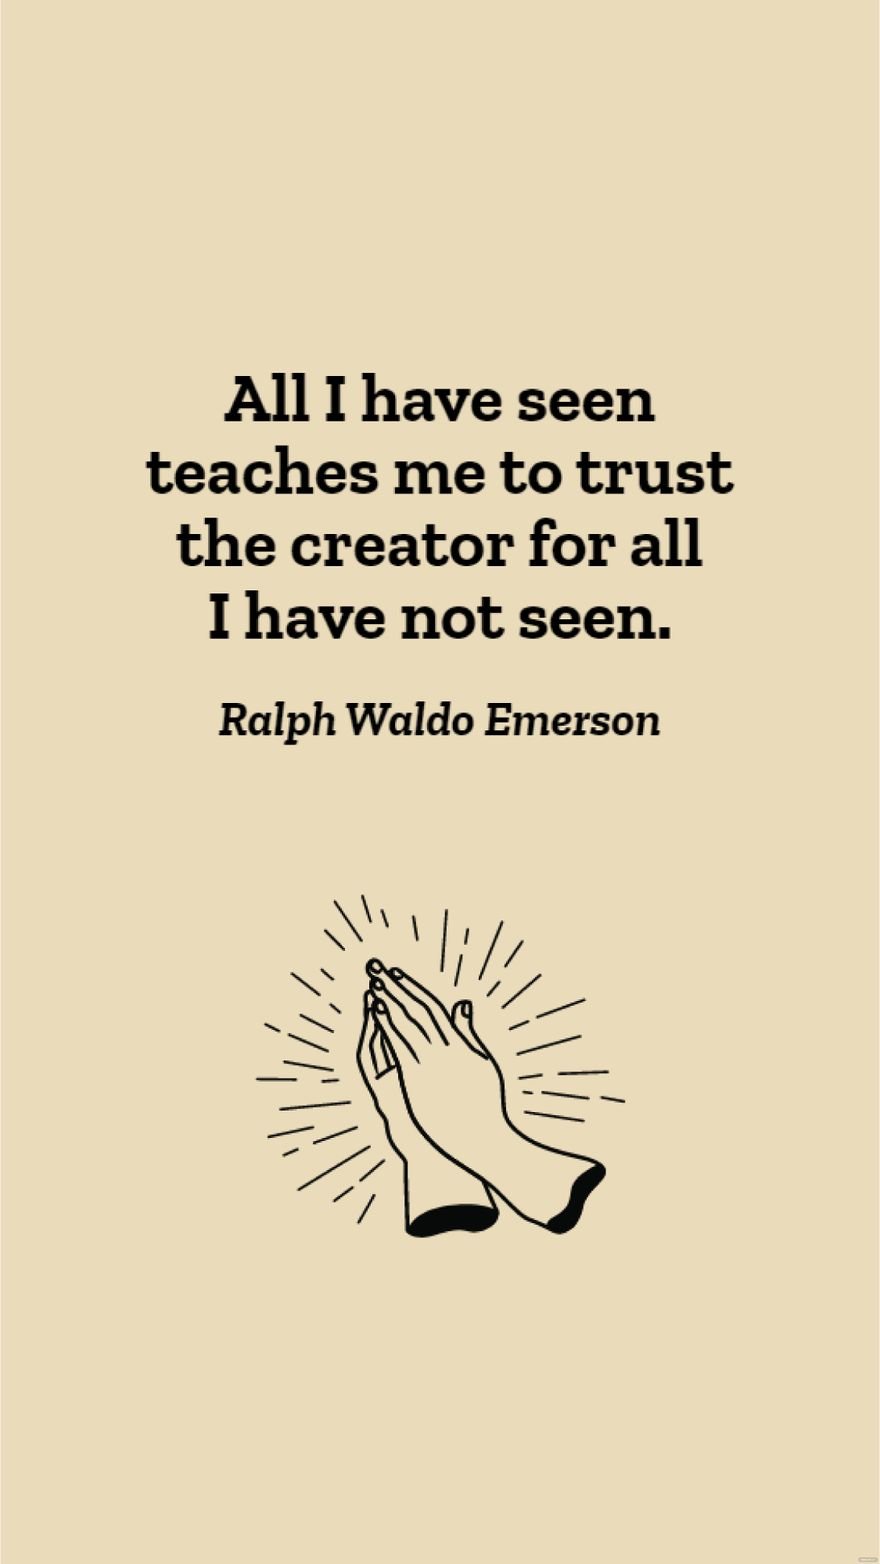 Ralph Waldo Emerson - All I have seen teaches me to trust the creator for all I have not seen.